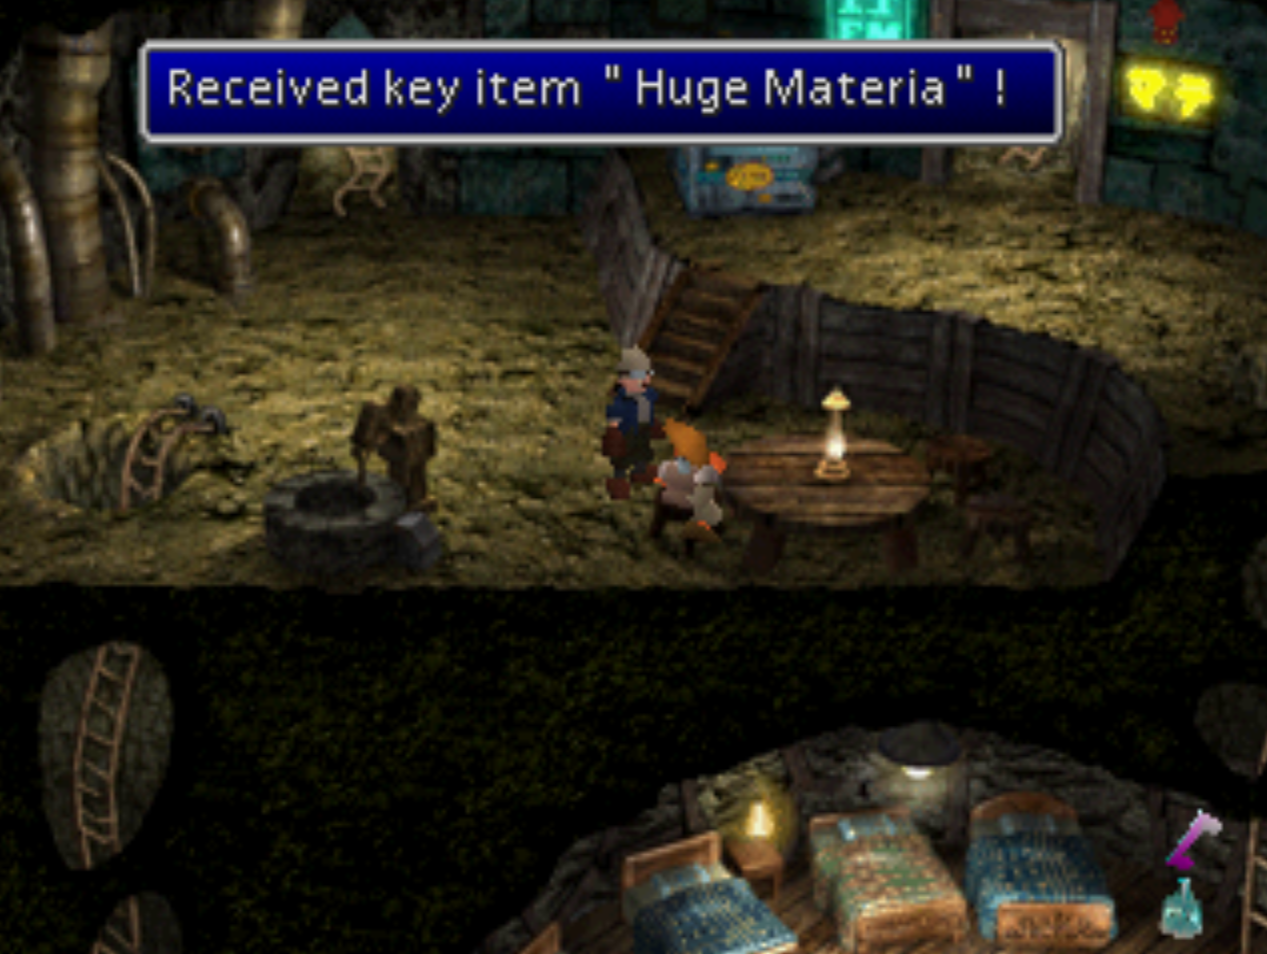 Huge Materia Received